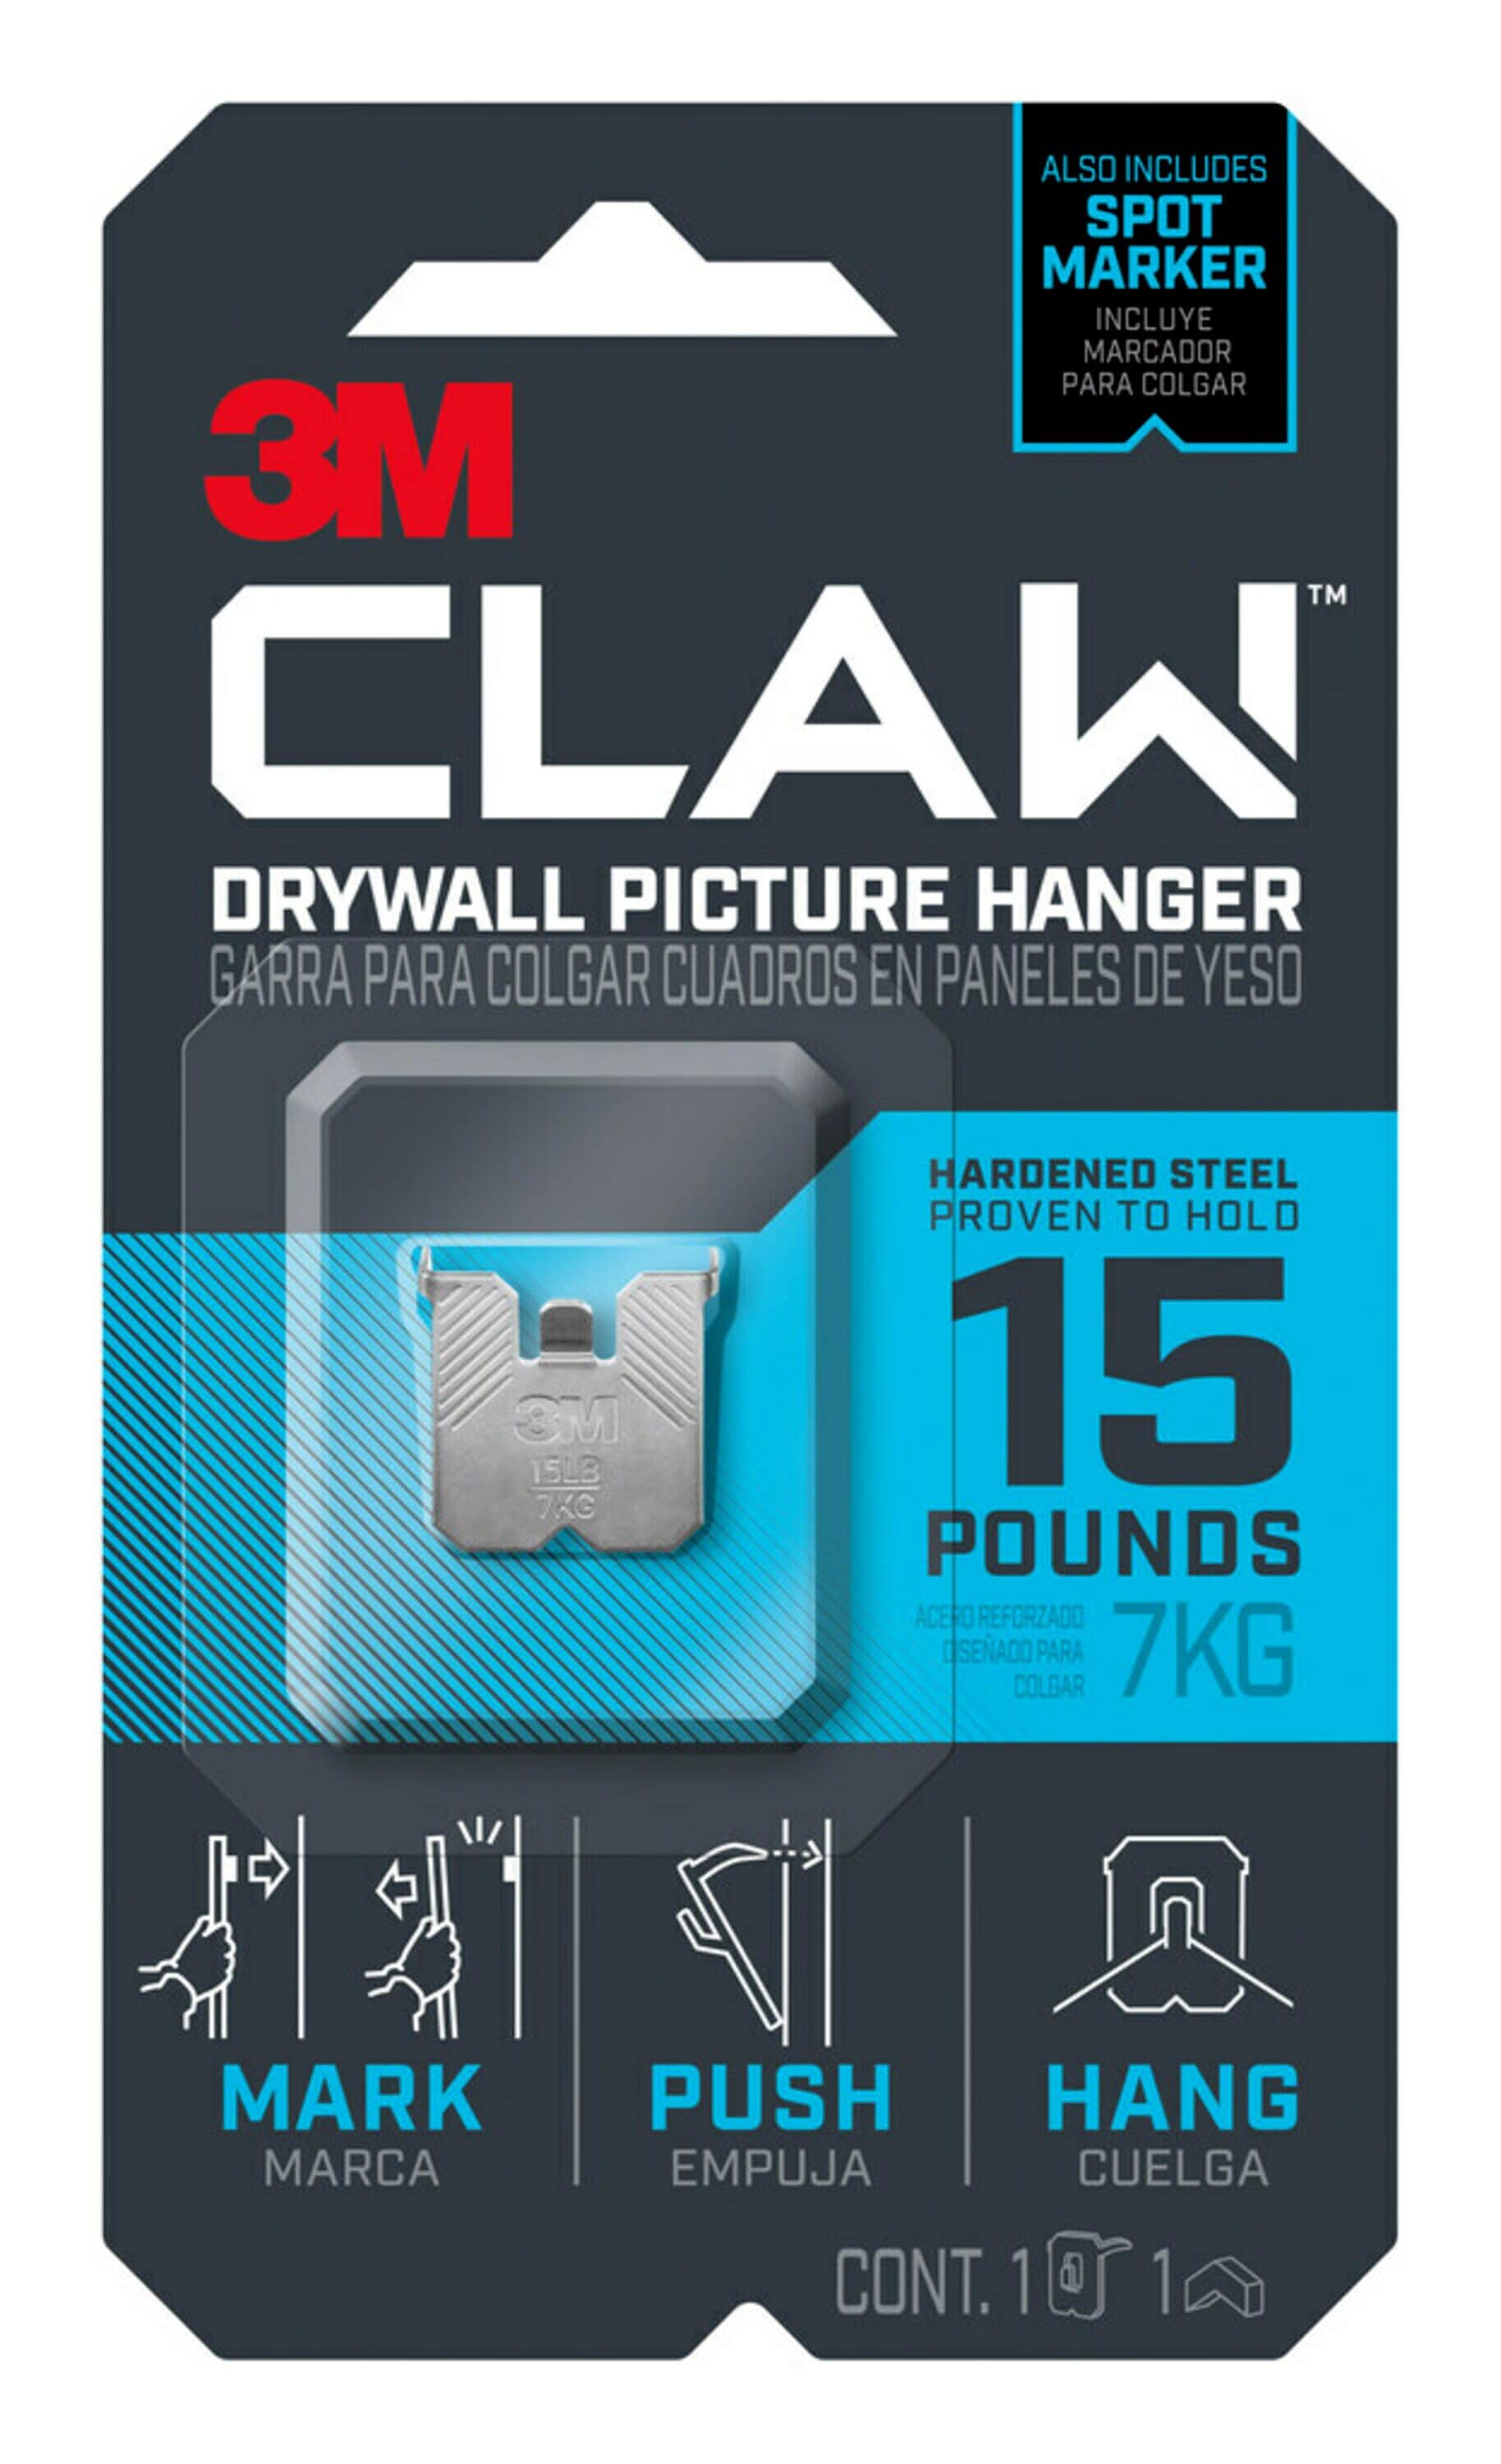 3M CLAW Drywall Picture Hanger Kit, Variety Pack with Spot